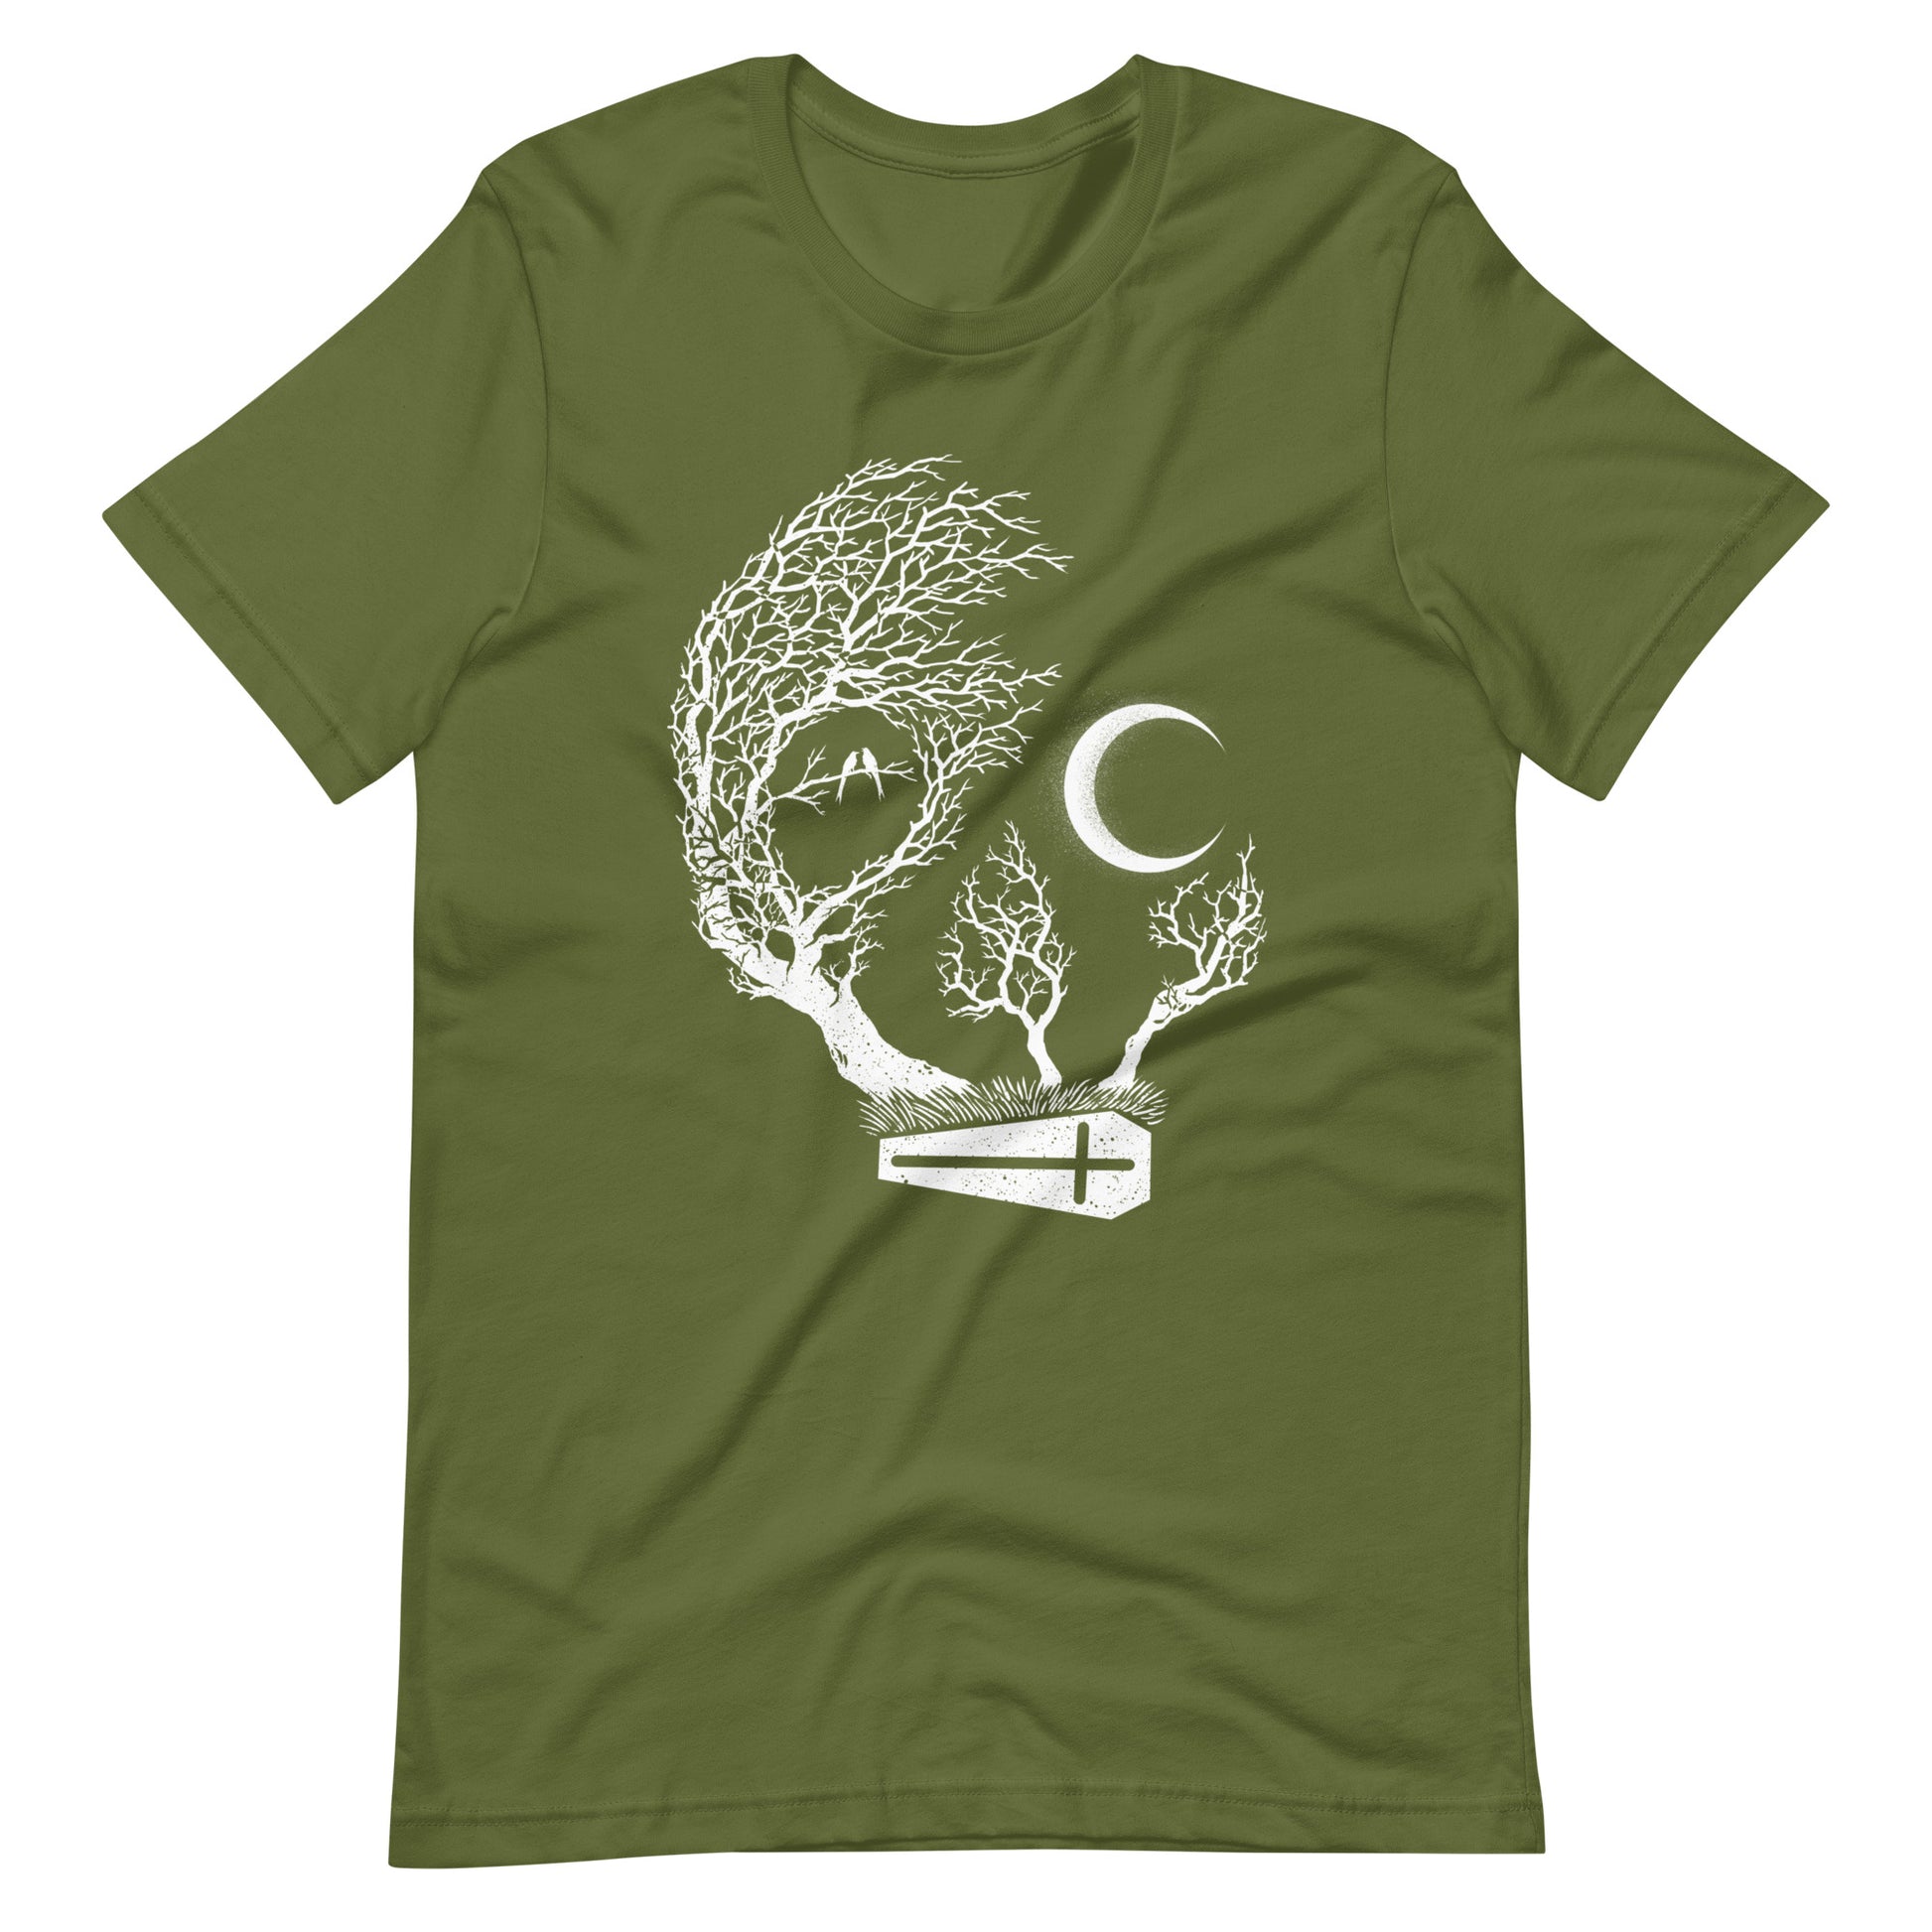 Friday Night Death - Men's t-shirt - Olive Front